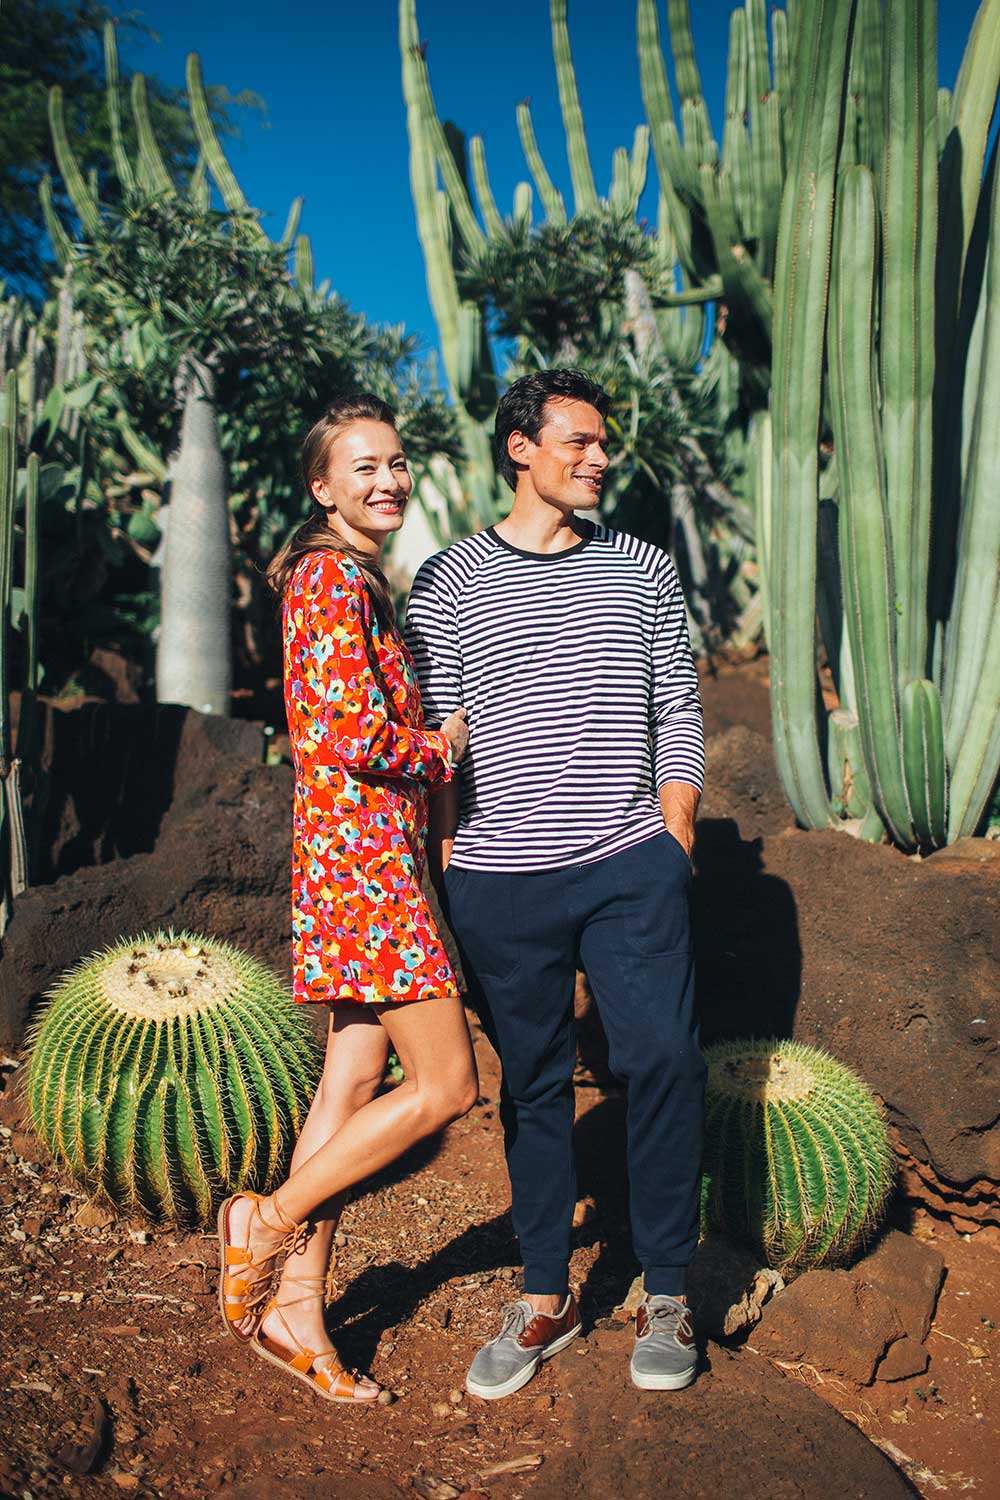 Woman in red flowered dress holding man's arm standing in cactus garden